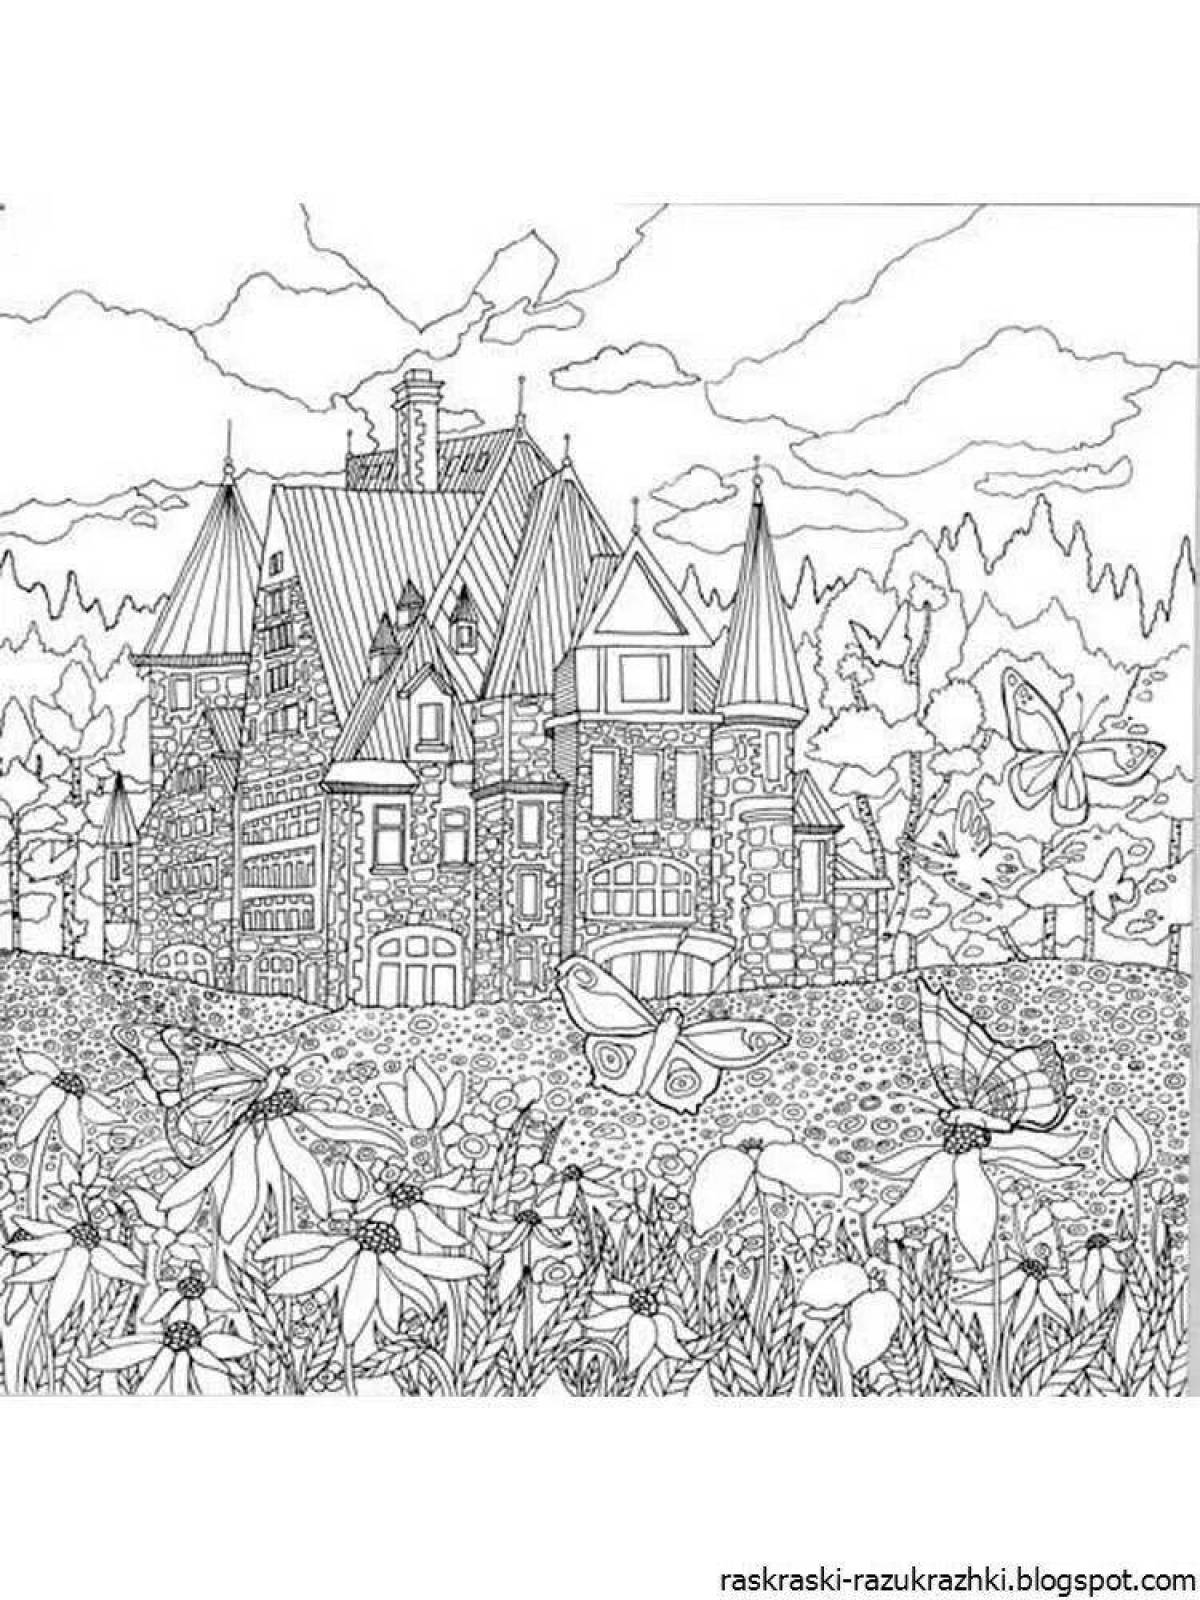 Grand coloring page nature is complex